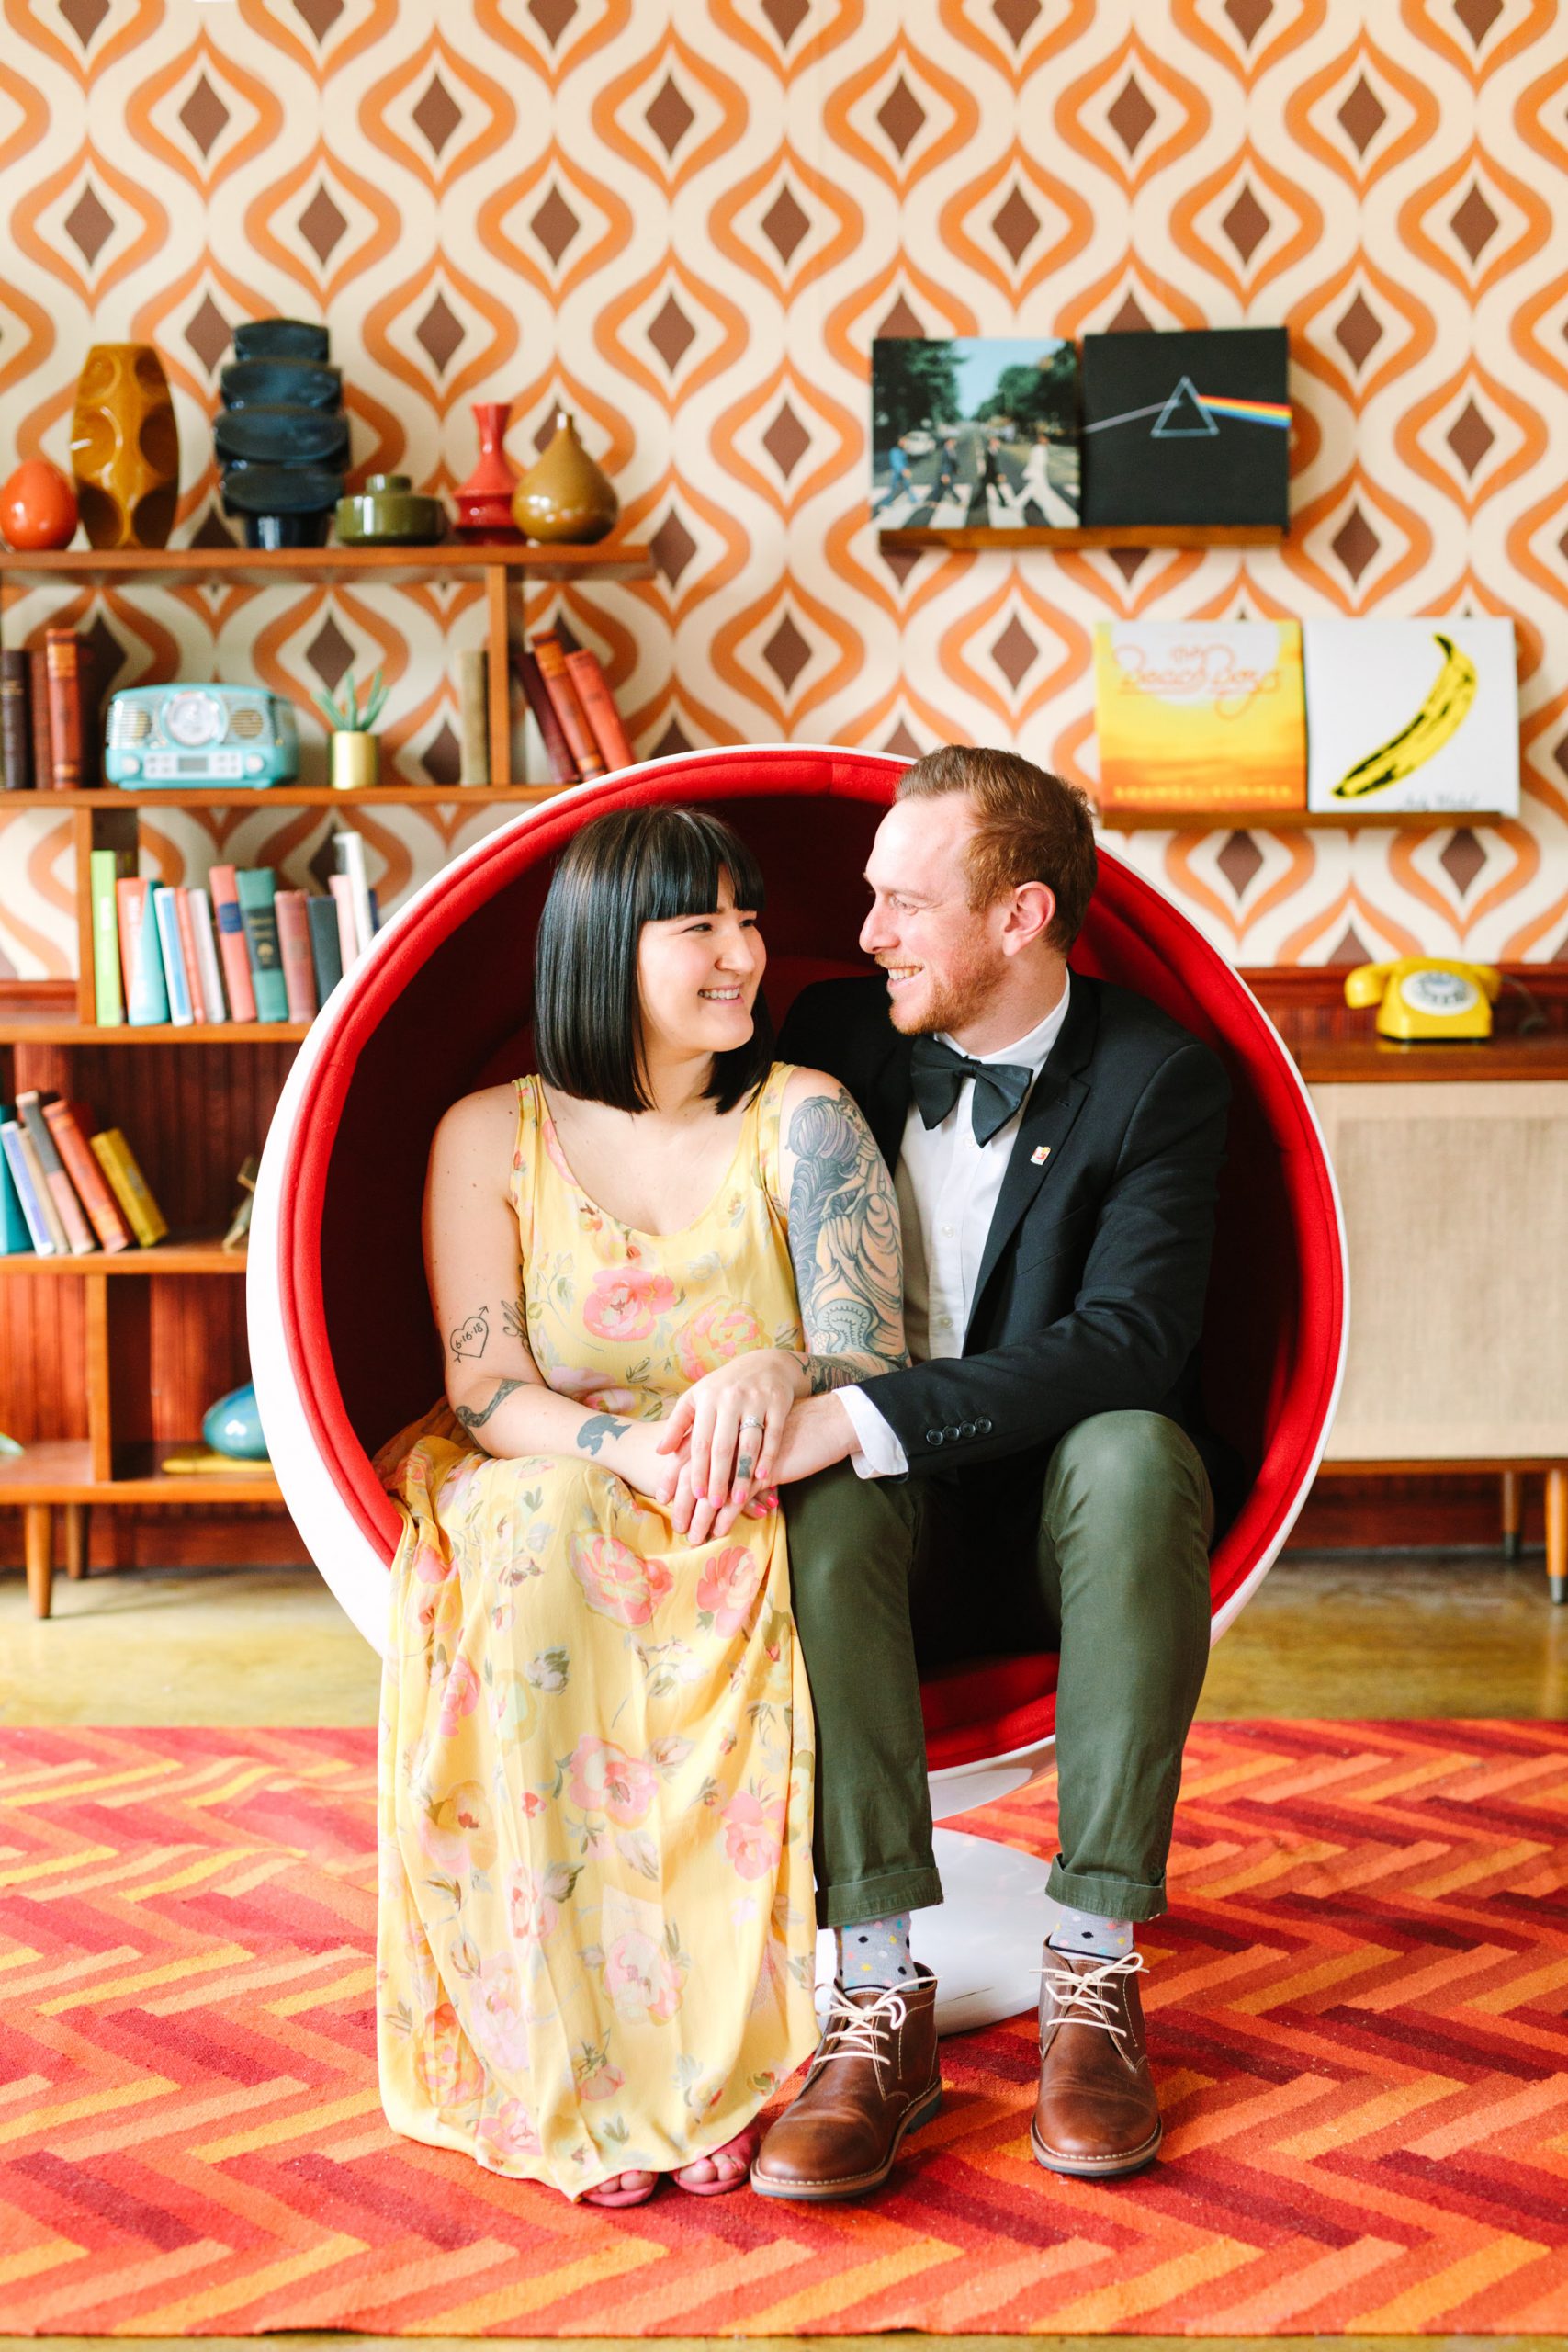 Couple in round chair surrounded by retro decor www.marycostaweddings.com